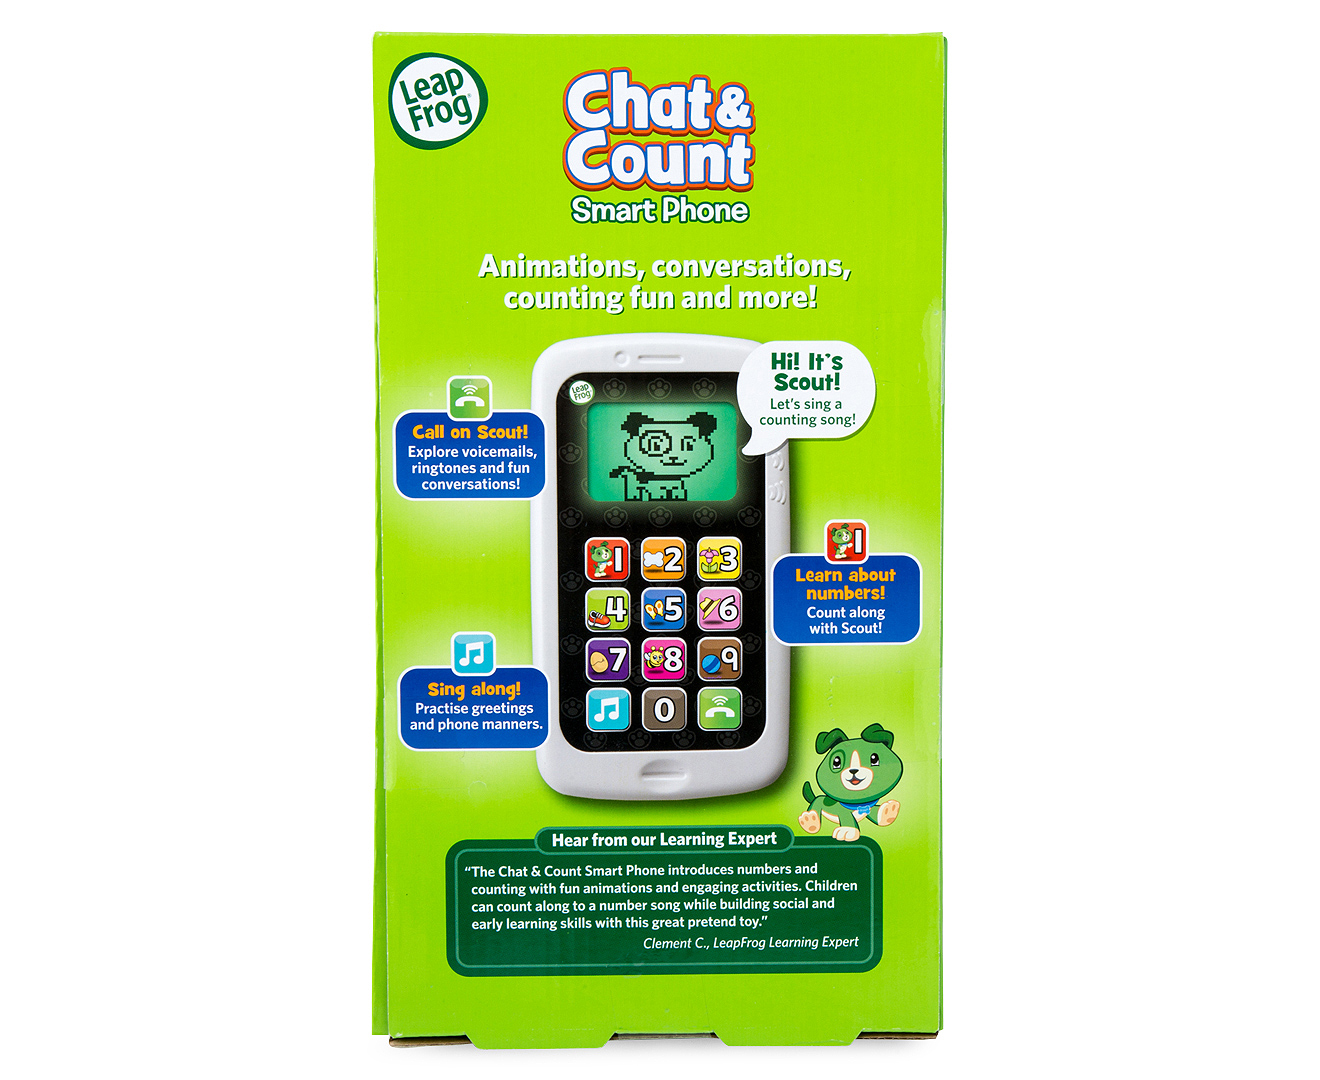 leapfrog chat and count phone instructions